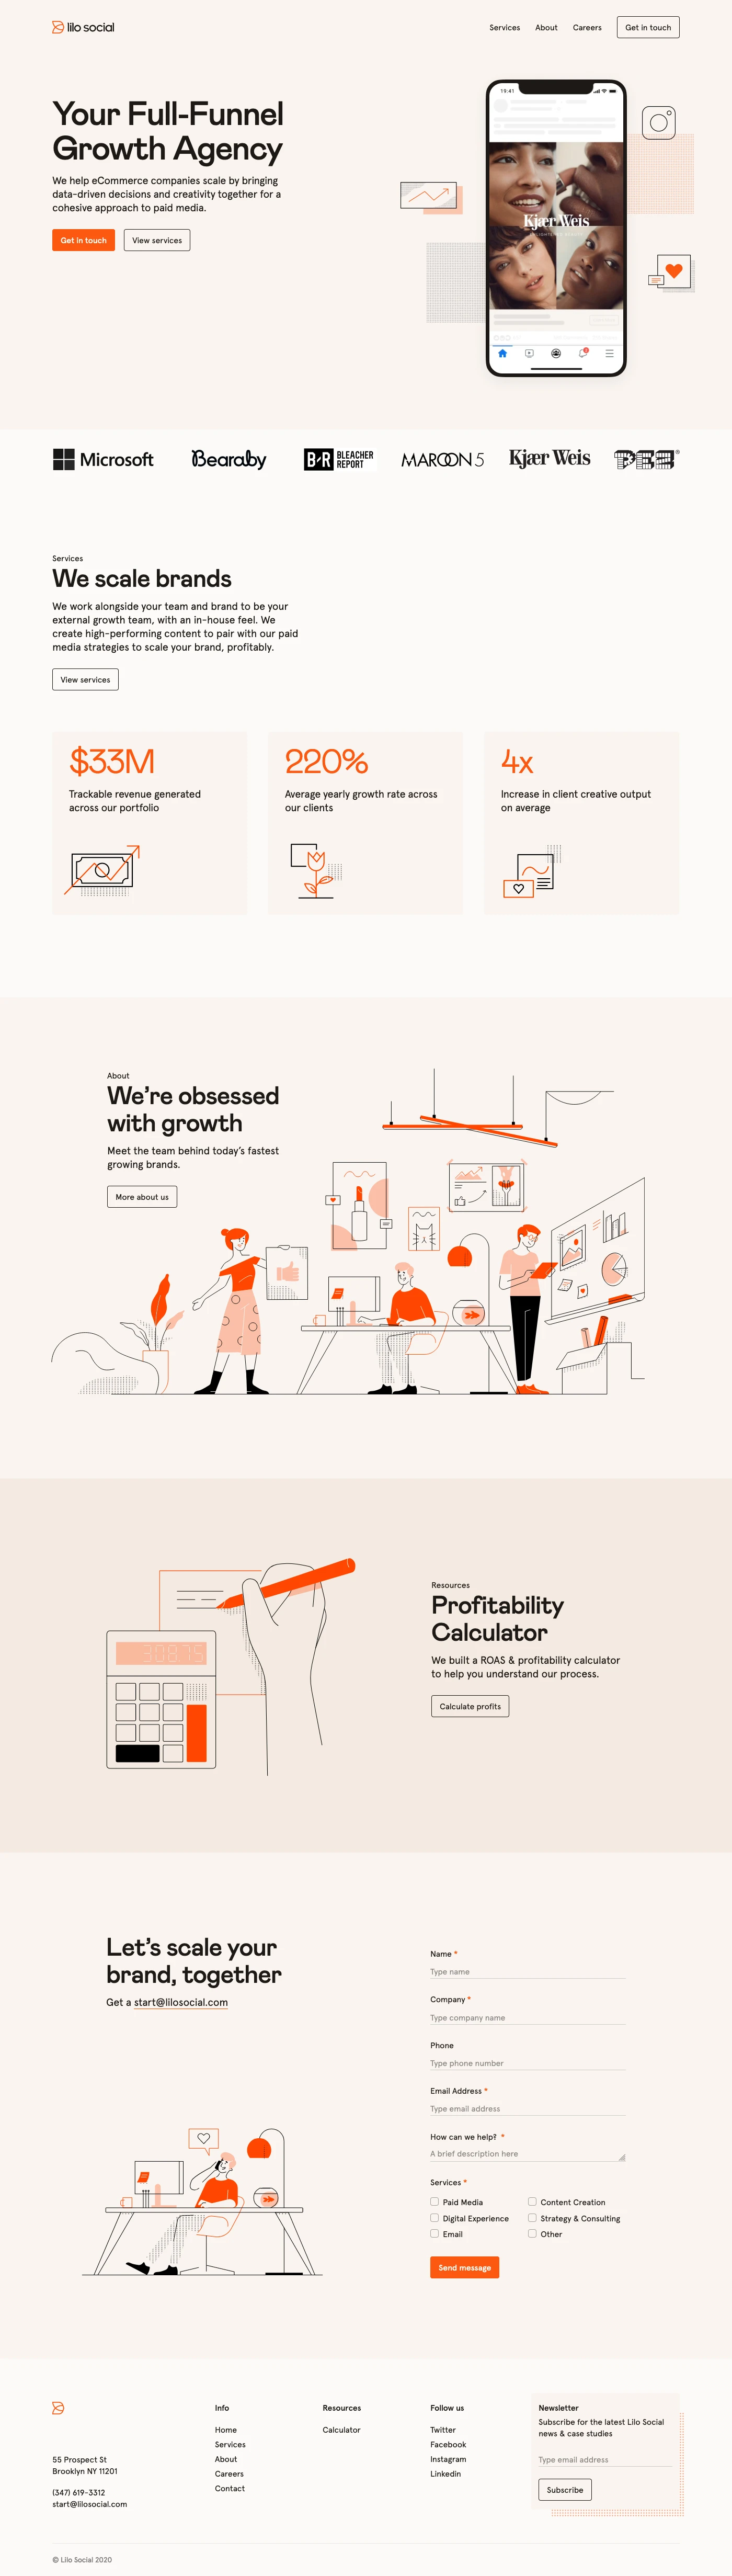 Lilo Social Landing Page Example: We scale brands. We work alongside your team and brand to be your external growth team, with an in-house feel. We create high-performing content to pair with our paid media strategies to scale your brand, profitably.